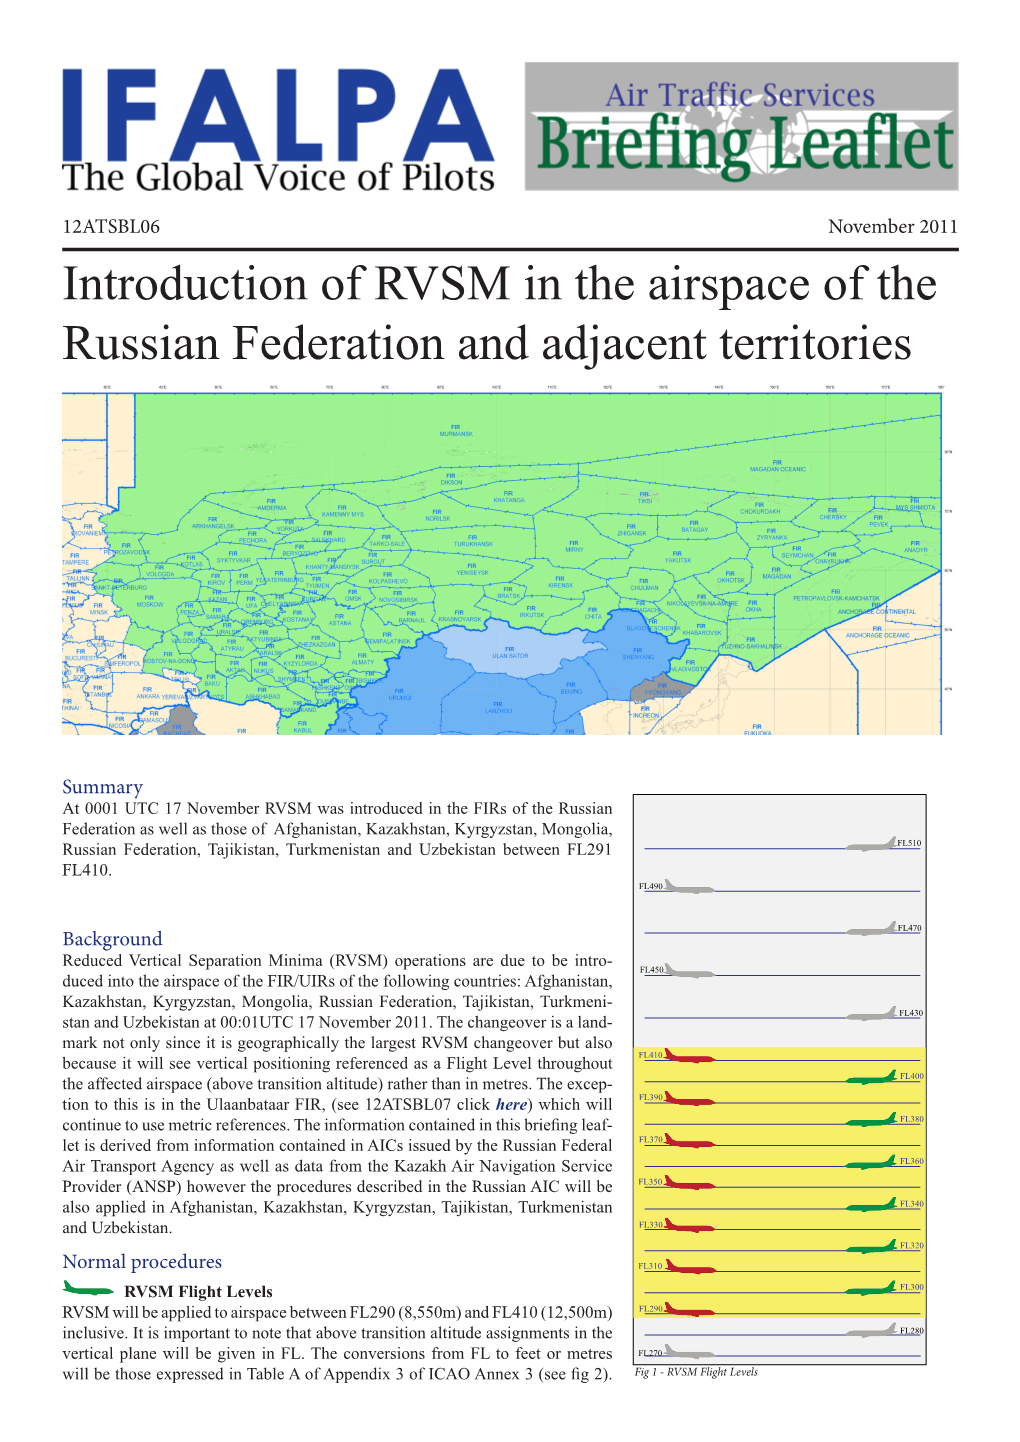 Introduction of RVSM in the Airspace of the Russian Federation and Adjacent Territories